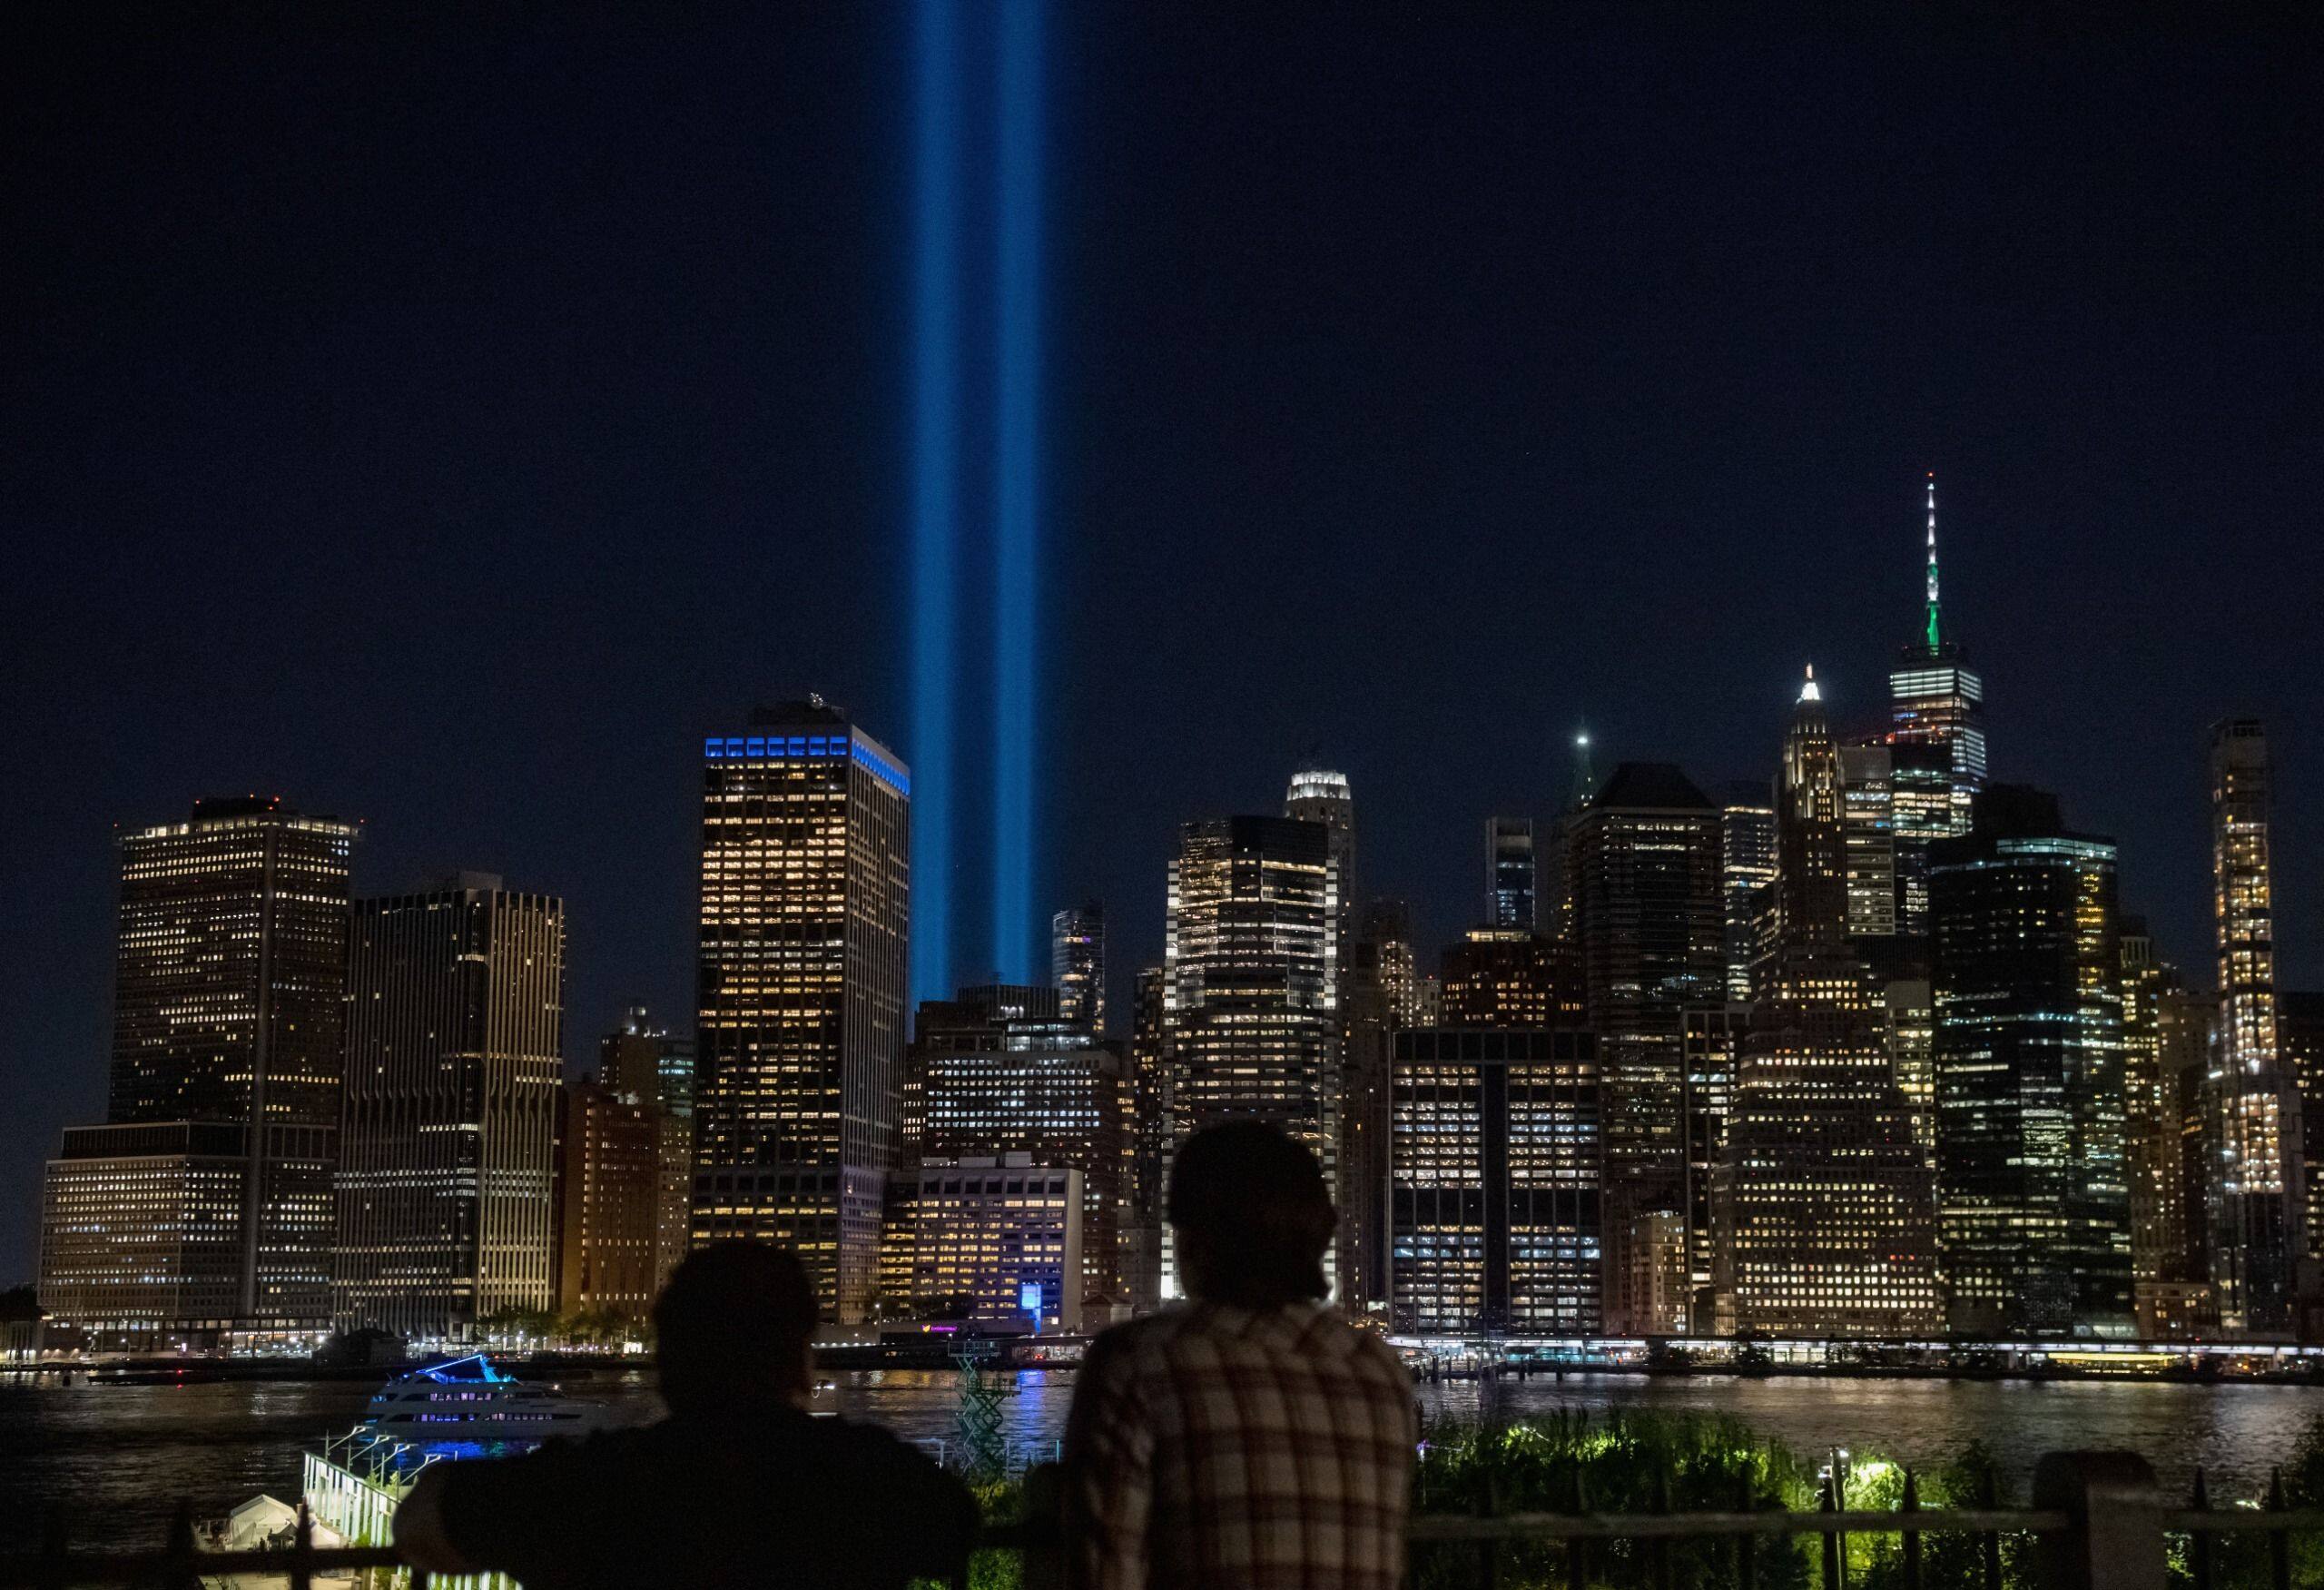 US Commemorates 20th Anniversary of September 11 Attacks